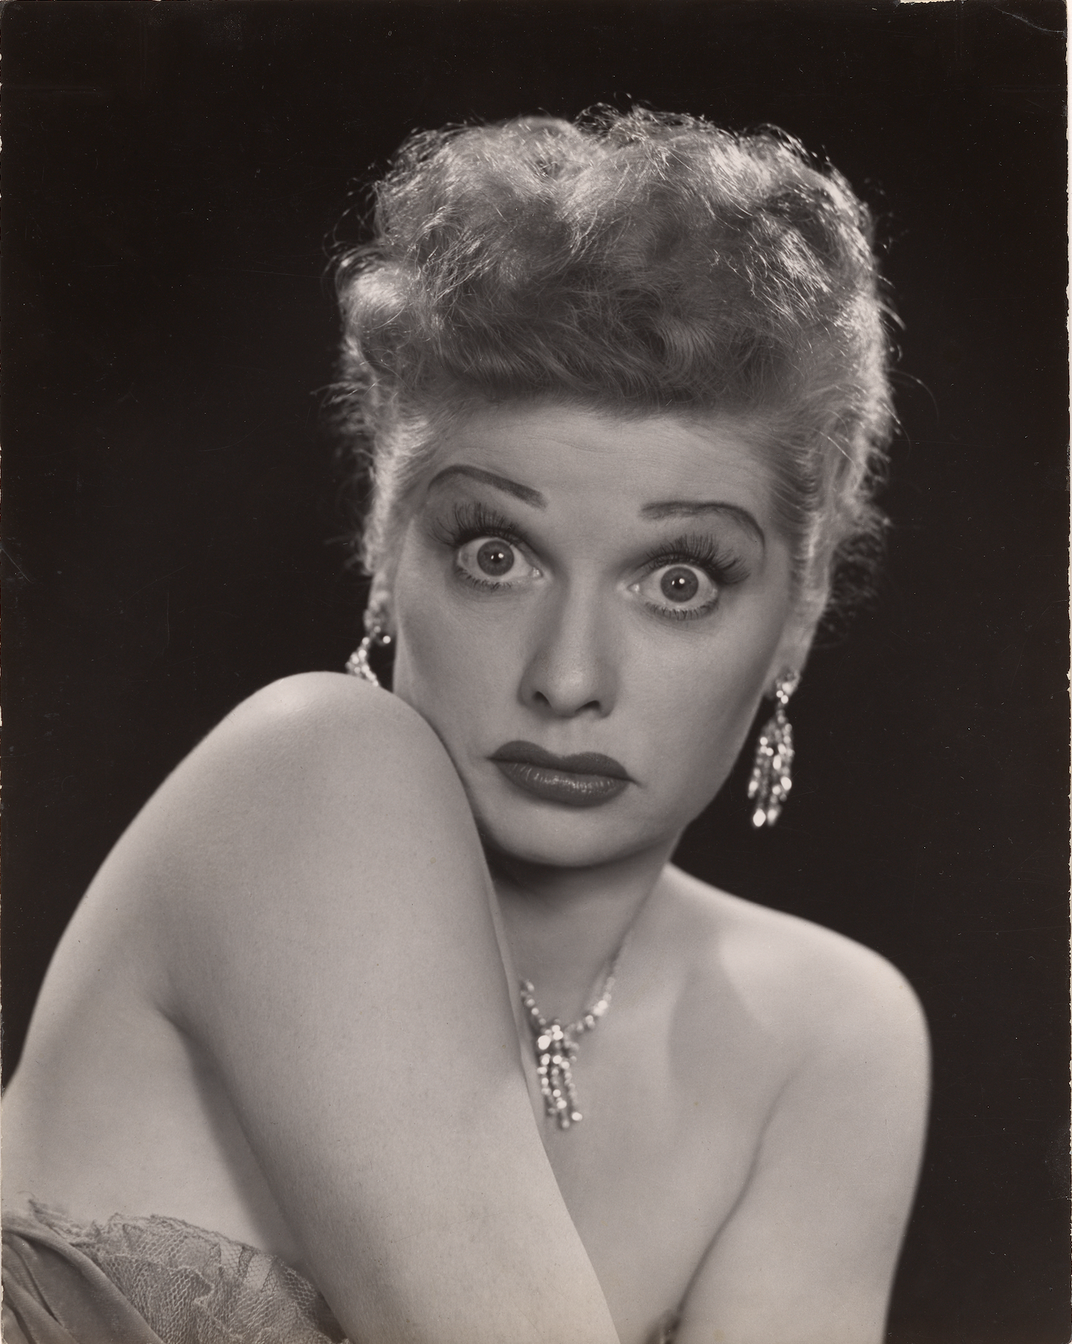 A 1950 portrait of Lucille Ball by photographer Philippe Halsman